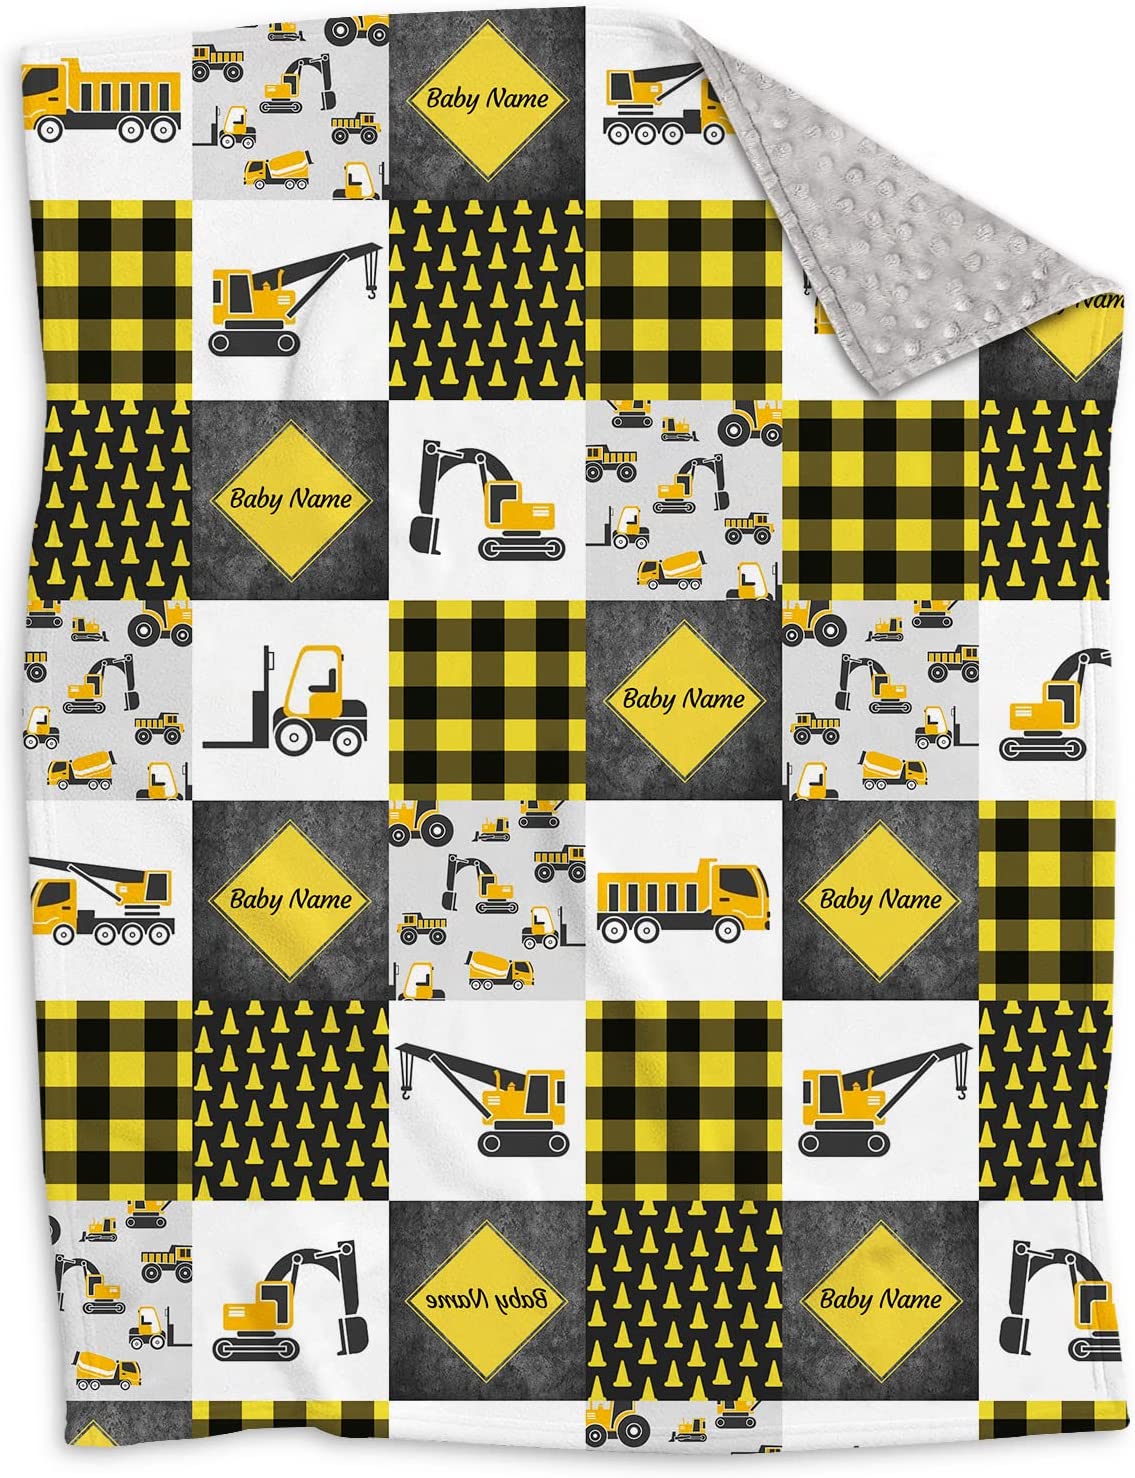 USA MADE Personalized Excavators Trucks Construction Equipment, Minky Blankets for Boys Girls Kids, Plaid Baby Blanket